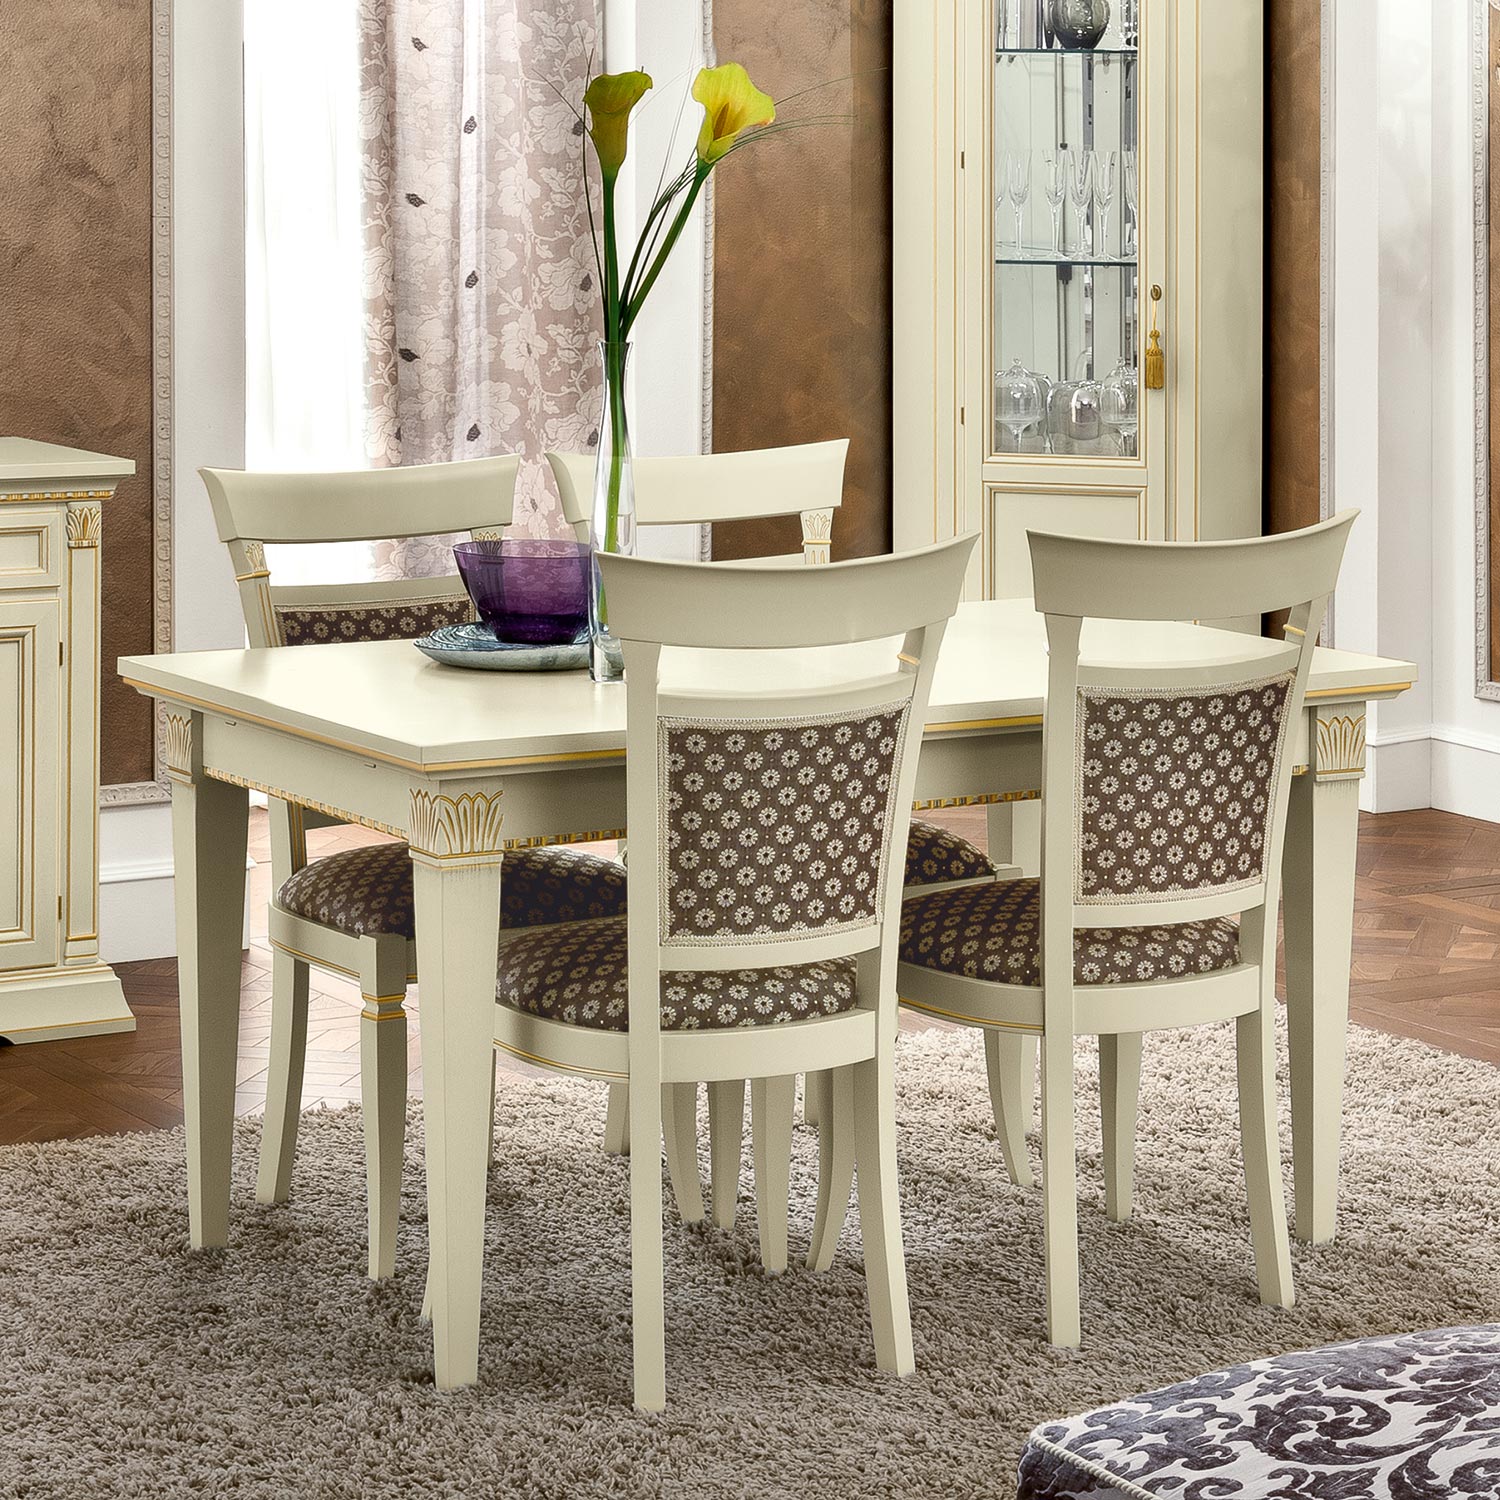 Treviso Ornate Ivory Ash Wood 5 Piece 1.4-2.3m Extending Dining Table Set